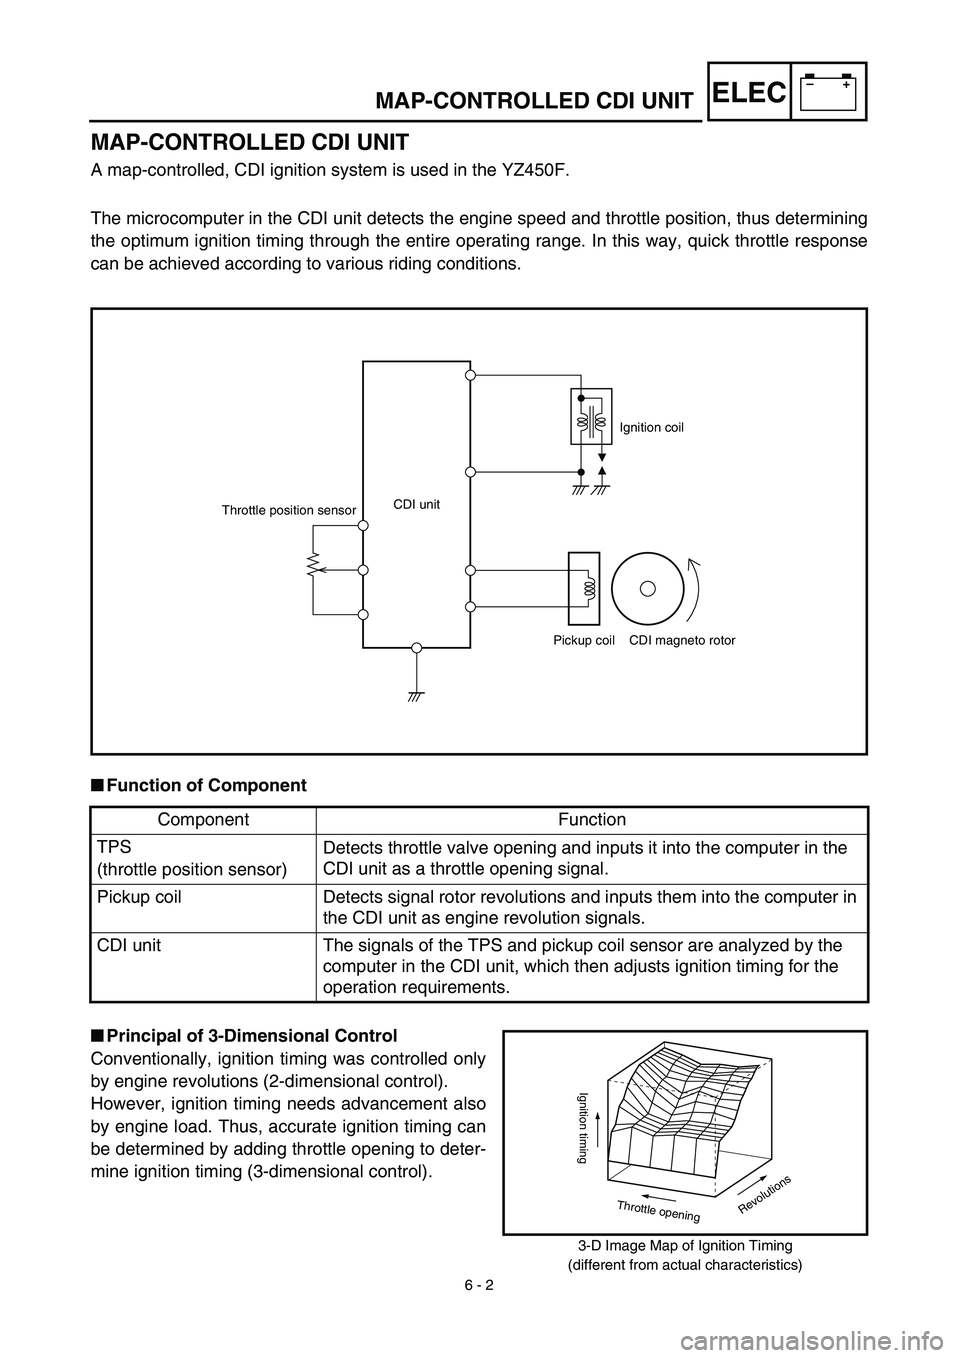 YAMAHA YZ450F 2003  Owners Manual –+ELEC
 
6 - 2 
MAP-CONTROLLED CDI UNIT
MAP-CONTROLLED CDI UNIT 
A map-controlled, CDI ignition system is used in the YZ450F.
The microcomputer in the CDI unit detects the engine speed and throttle 